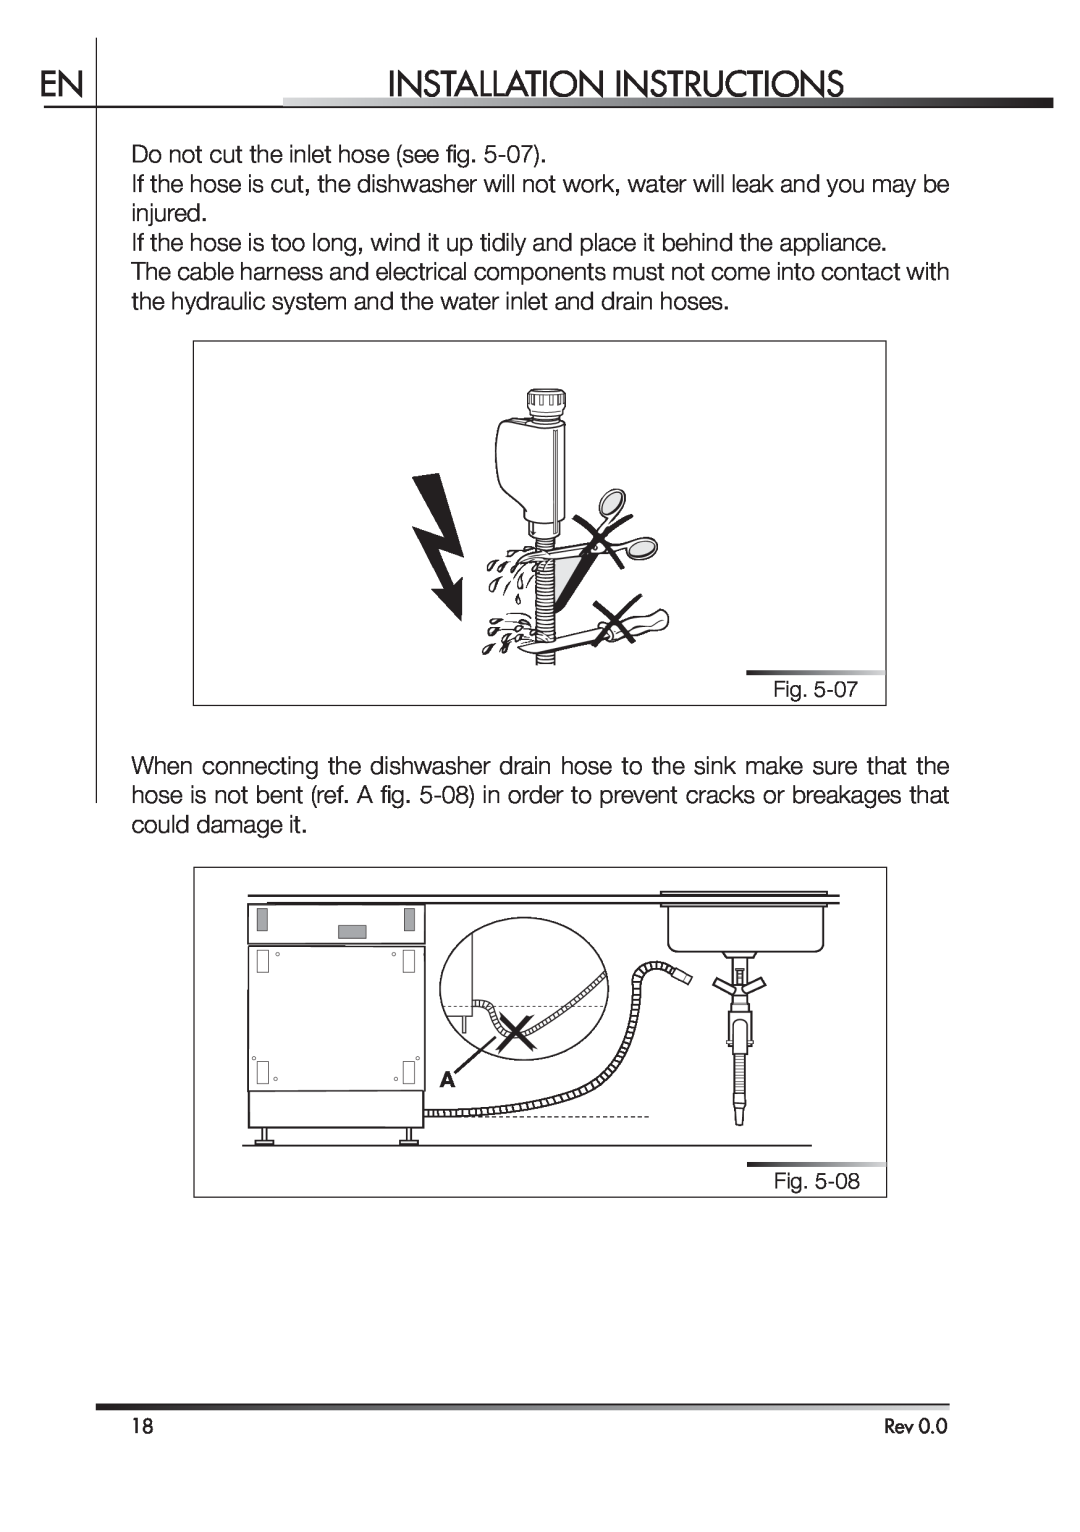 Smeg STA4645 instruction manual Installation Instructions, Do not cut the inlet hose see ﬁ g 